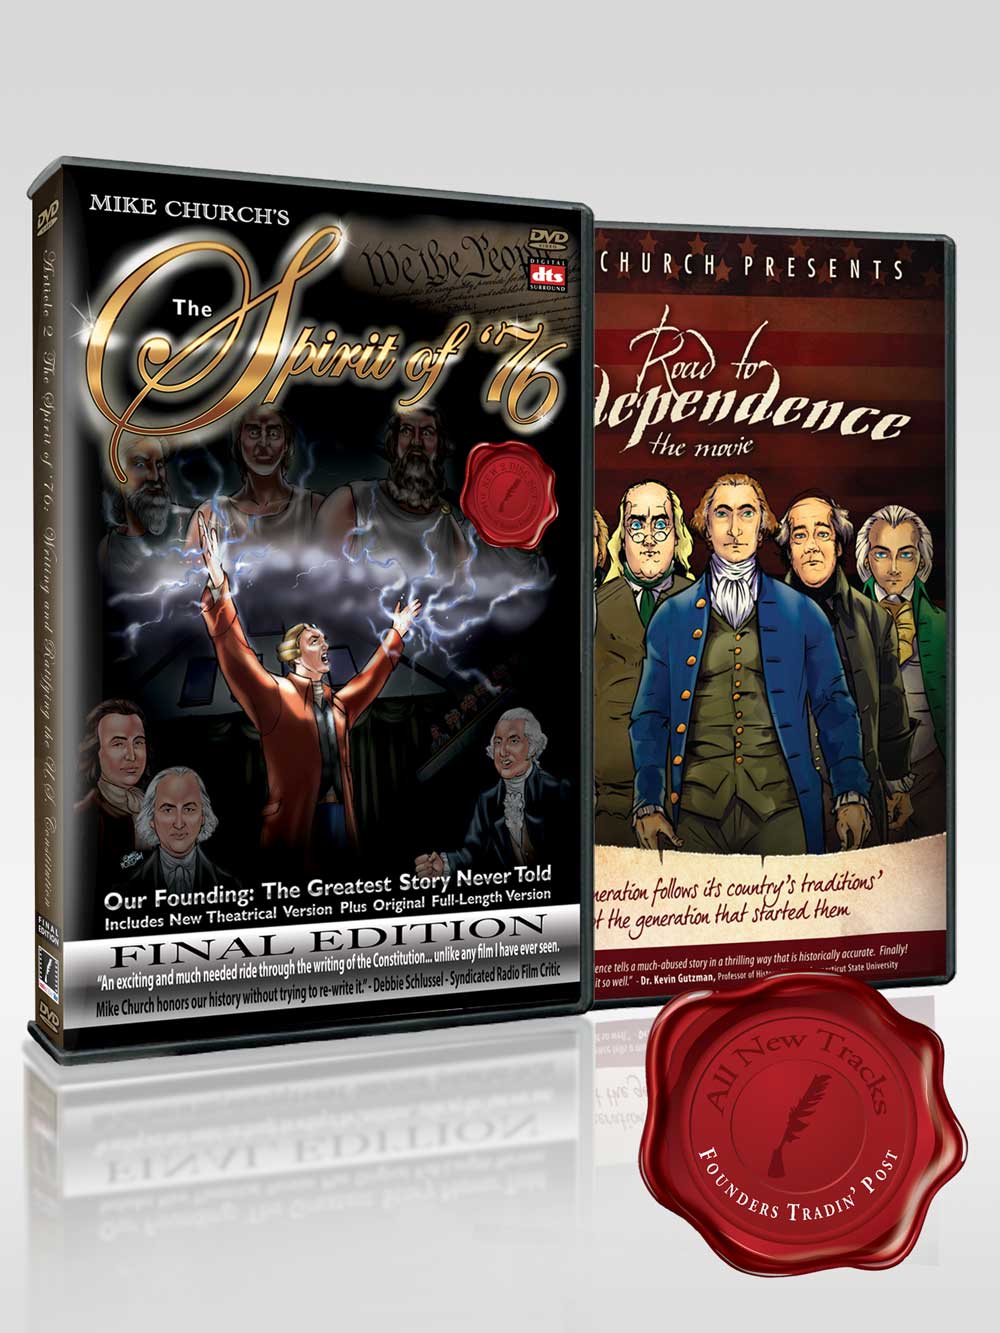 If you want the Founders View on Many issues, the Spirit of 76 & Road to Independence Movies have them, as they lived them, on DVD